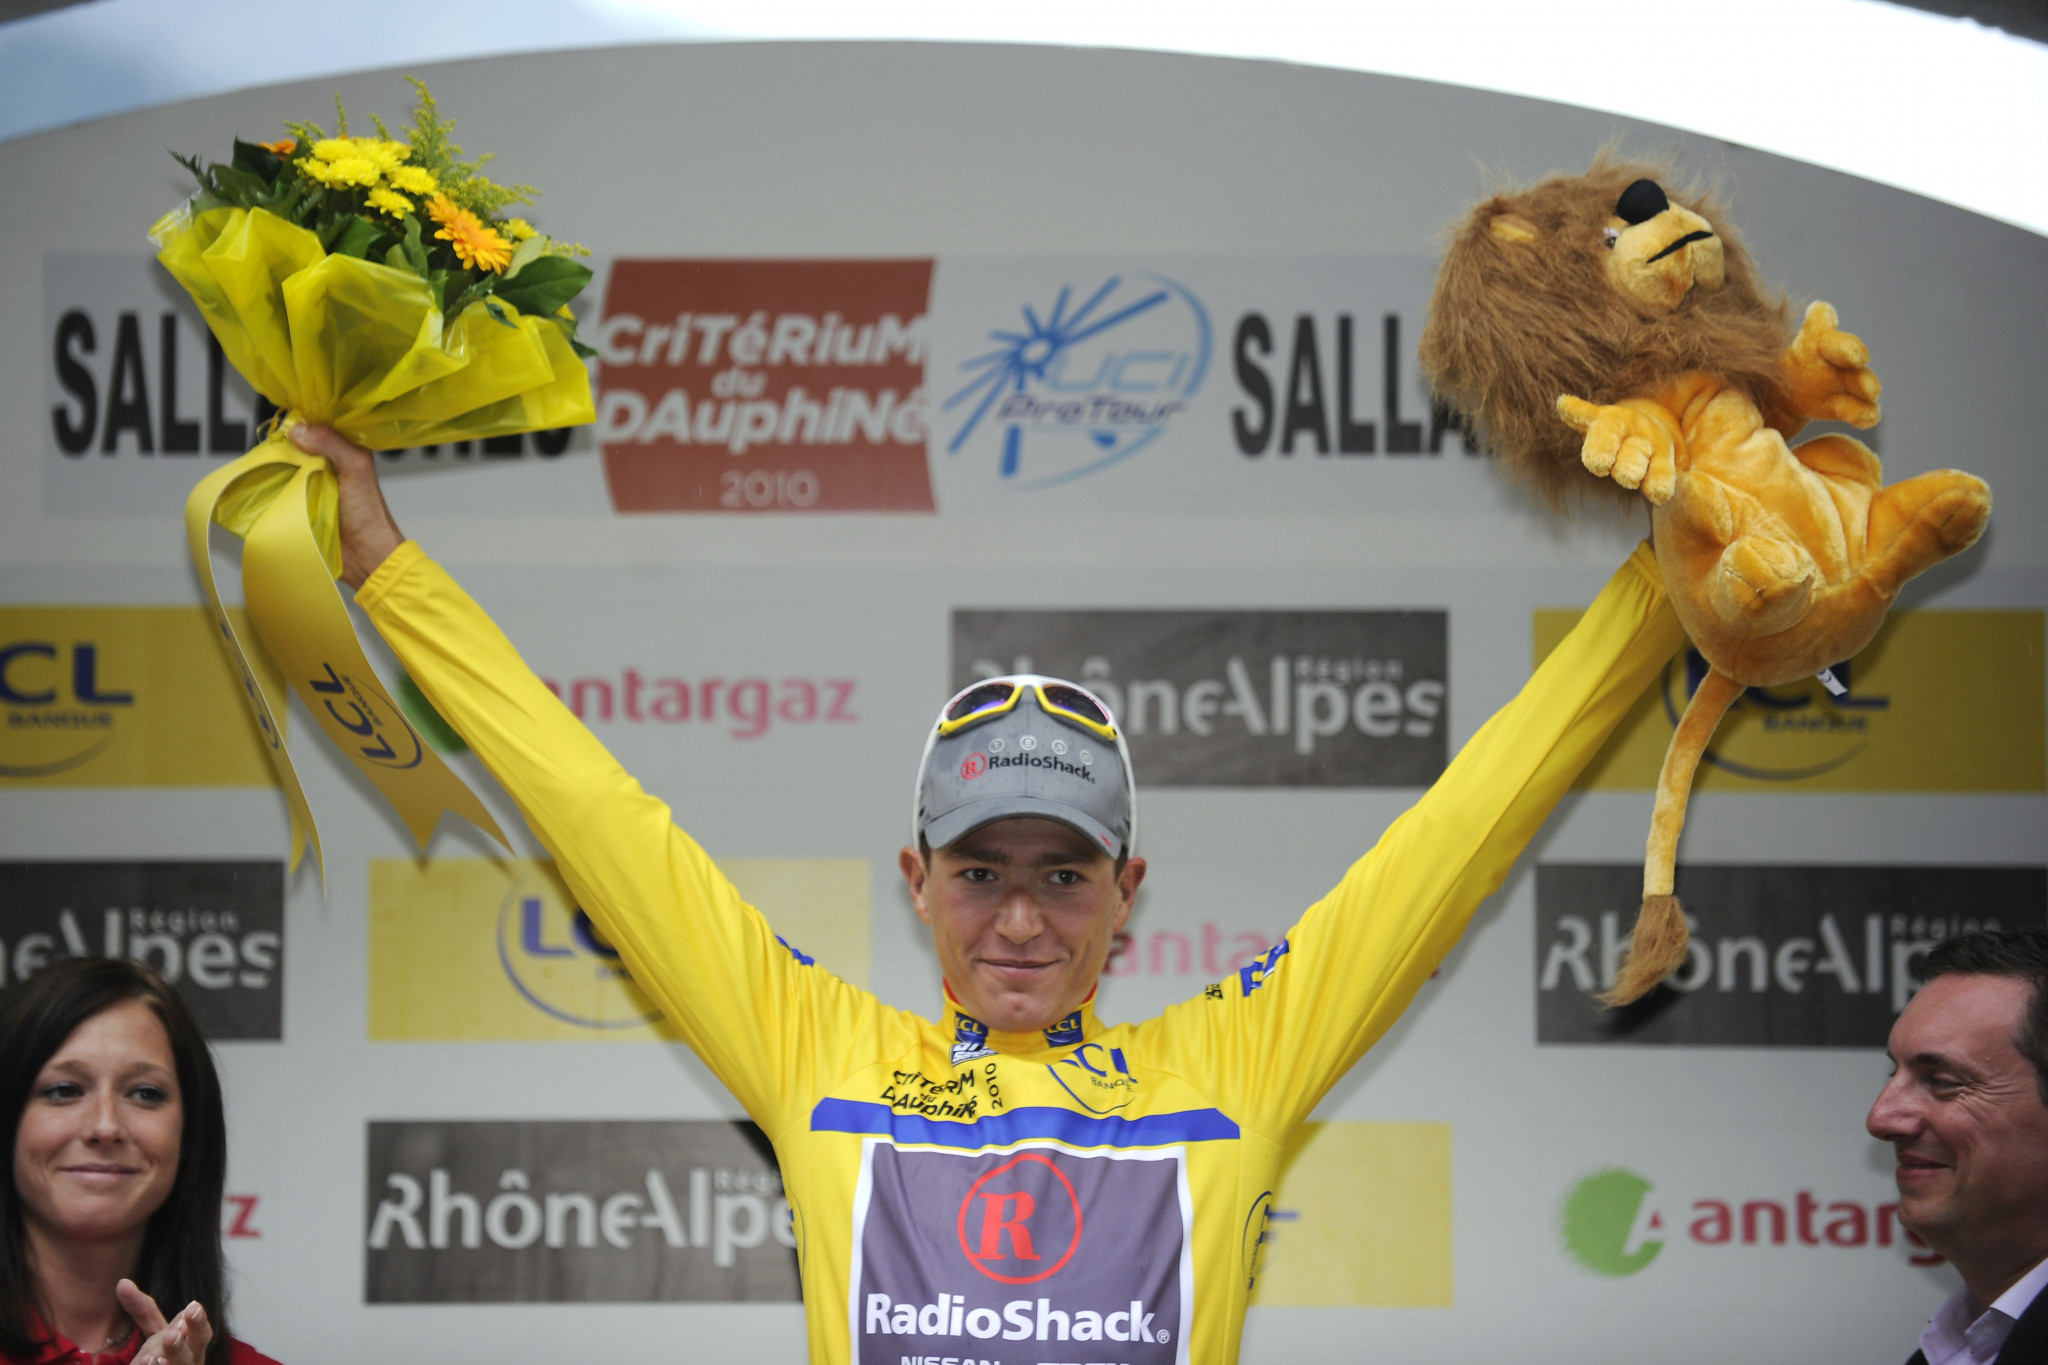 Brajkovic won the Critérium du Dauphiné in 2010, the biggest stage race victory of his career so far ©Getty Images 